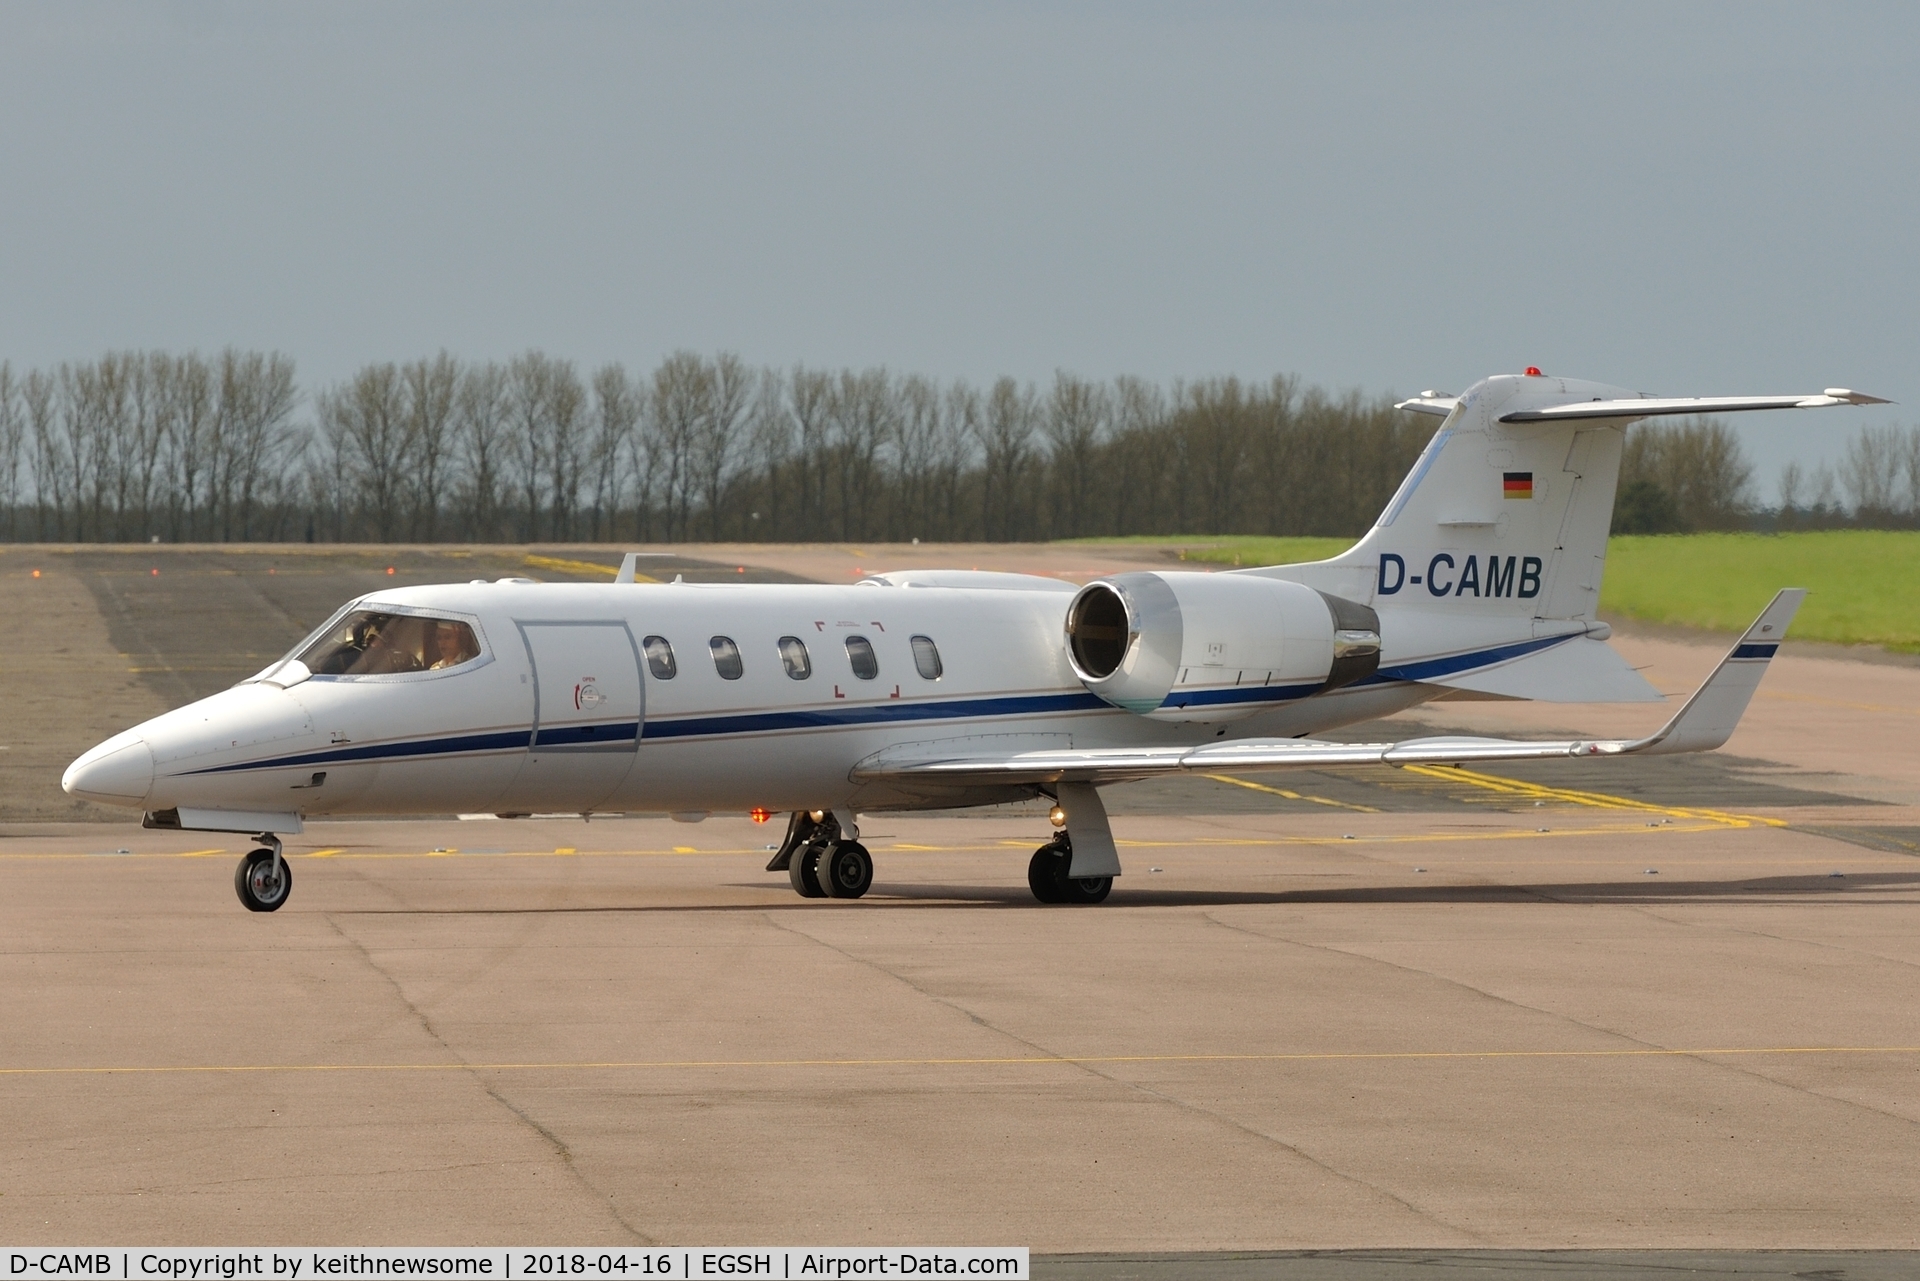 D-CAMB, 1998 Learjet 31A C/N 31-155, Arriving at Norwich from Malaga.